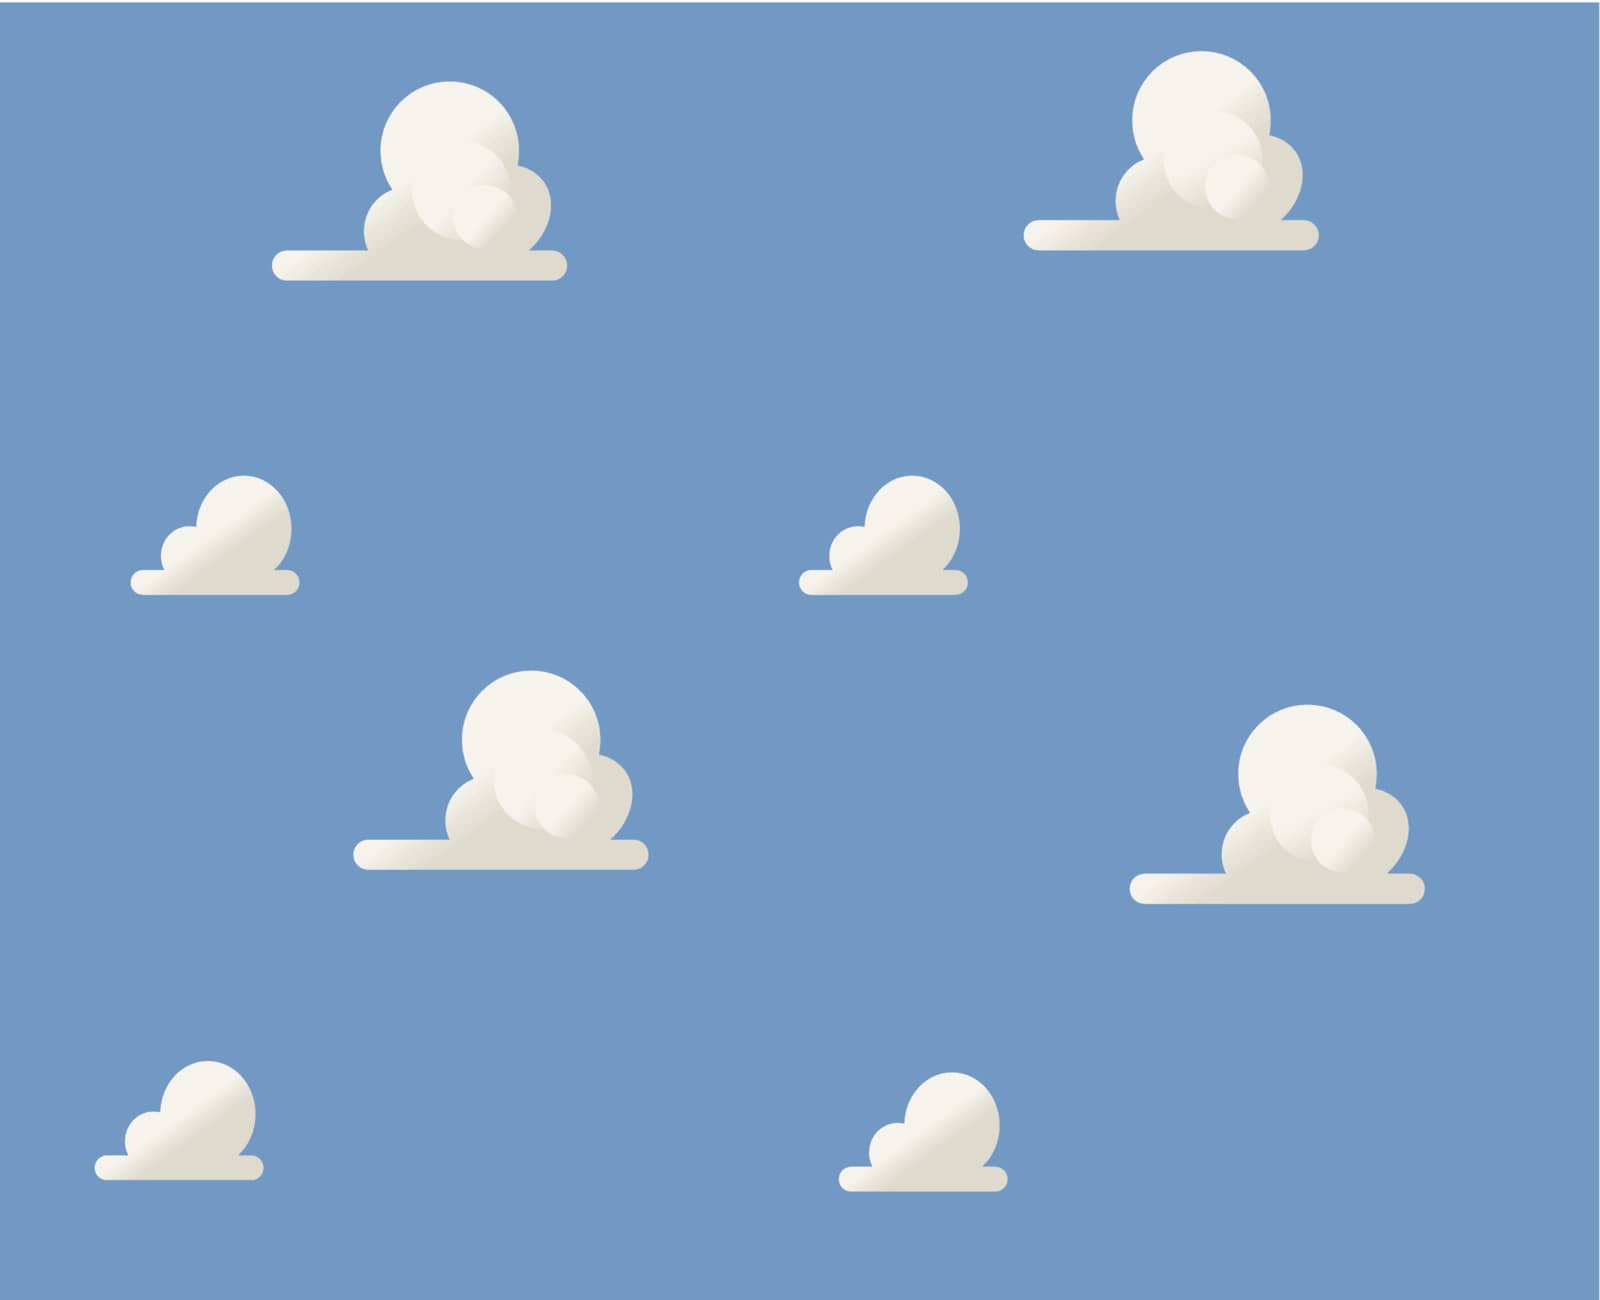 A blue sky with clouds illustration background.
Vector available.